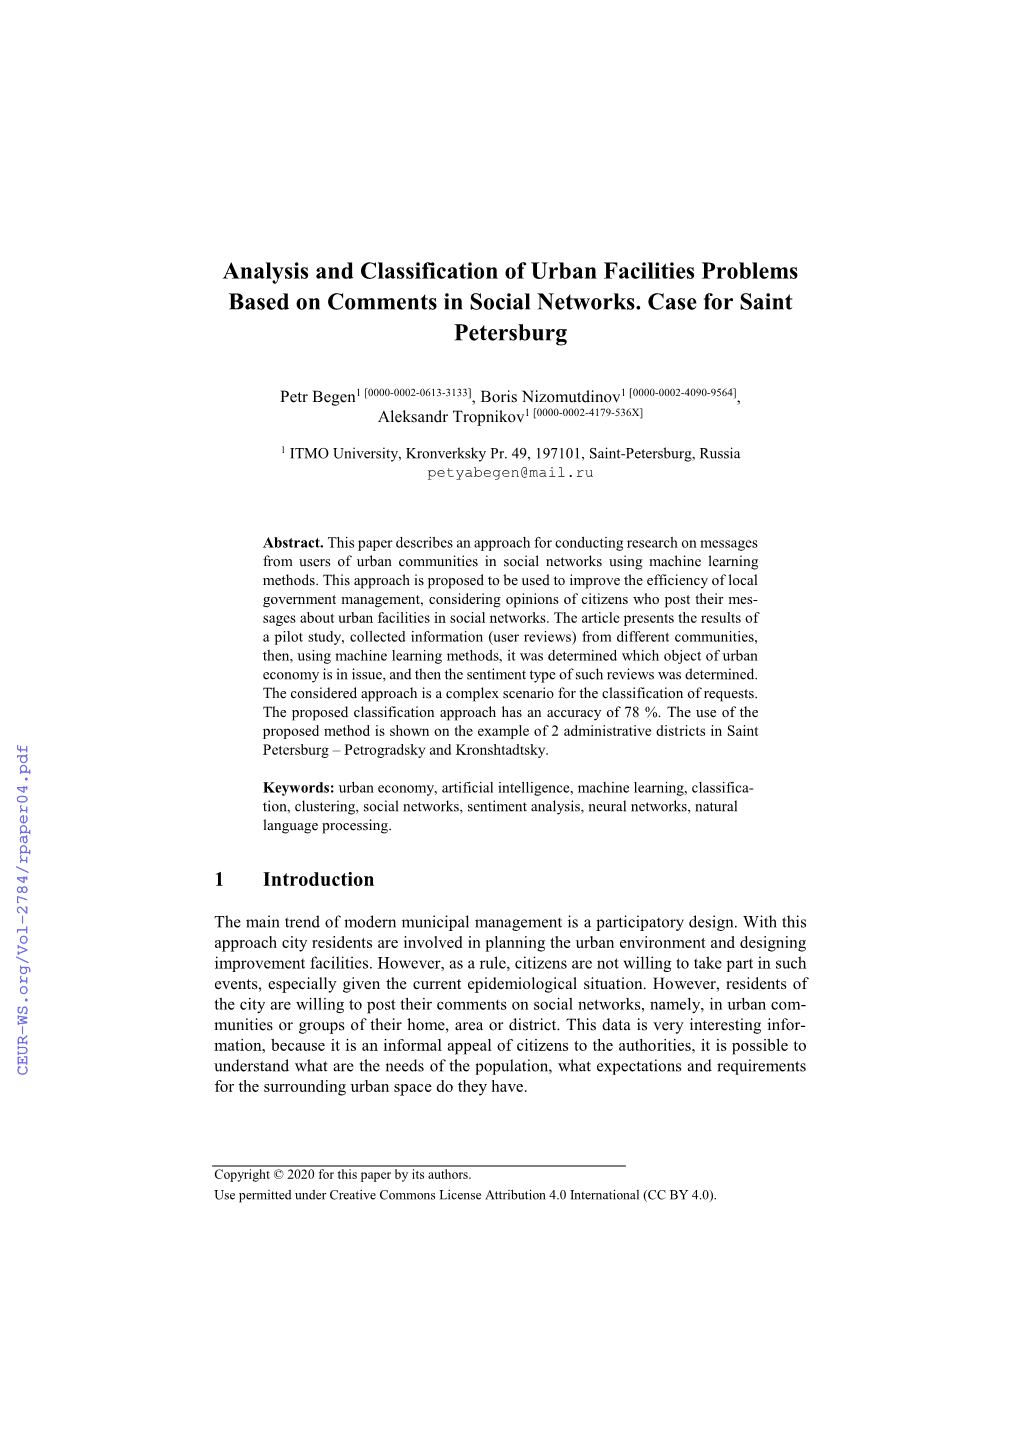 Analysis and Classification of Urban Facilities Problems Based on Comments in Social Networks